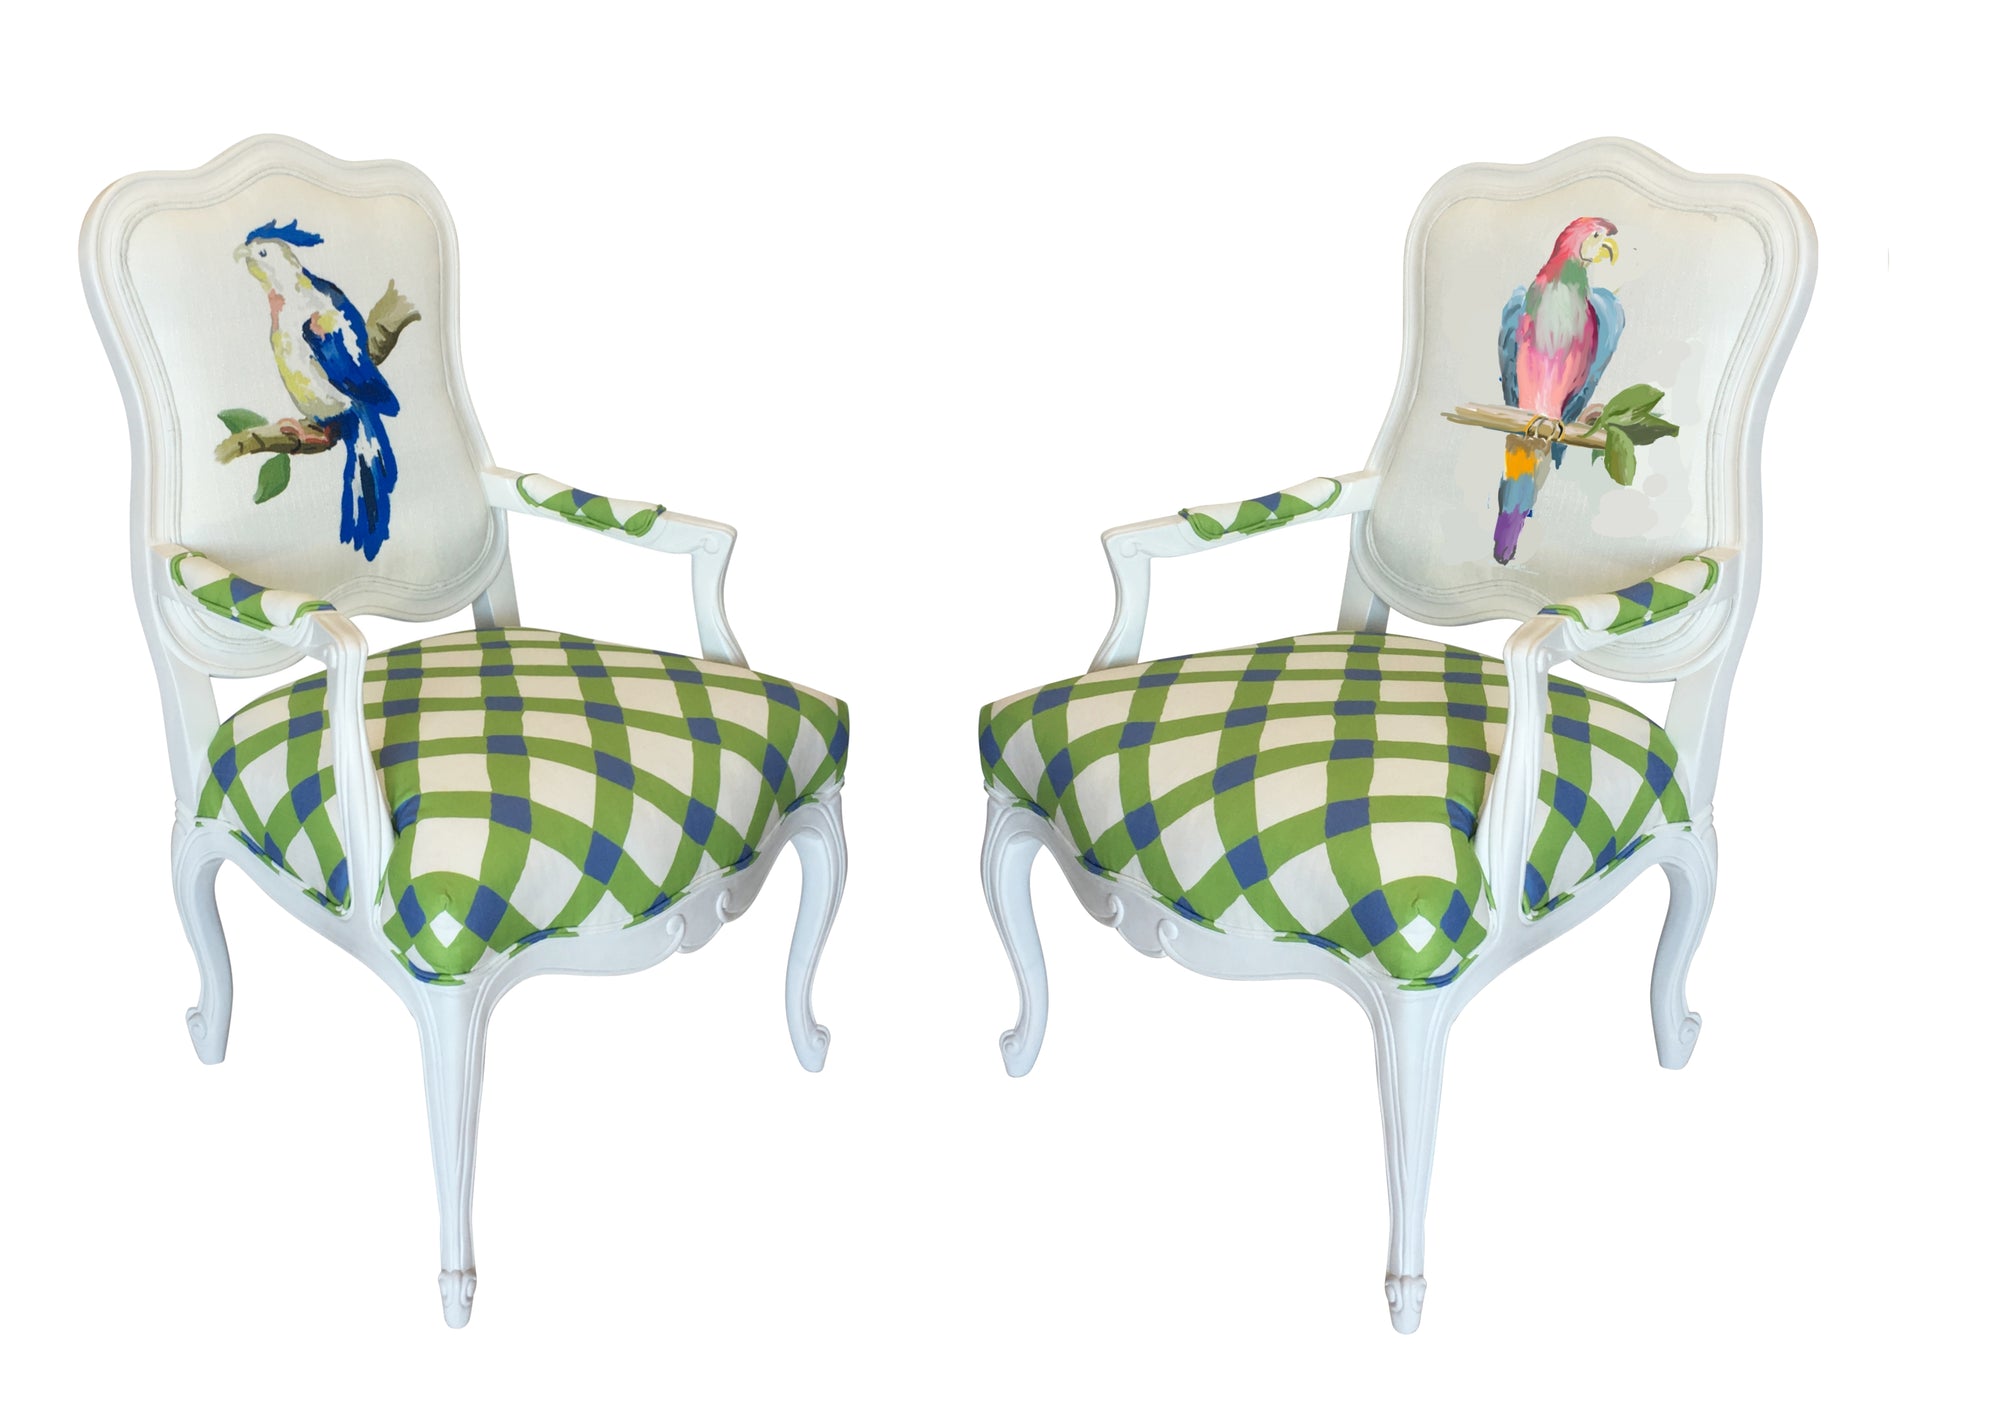 Parrot Chair in Multi